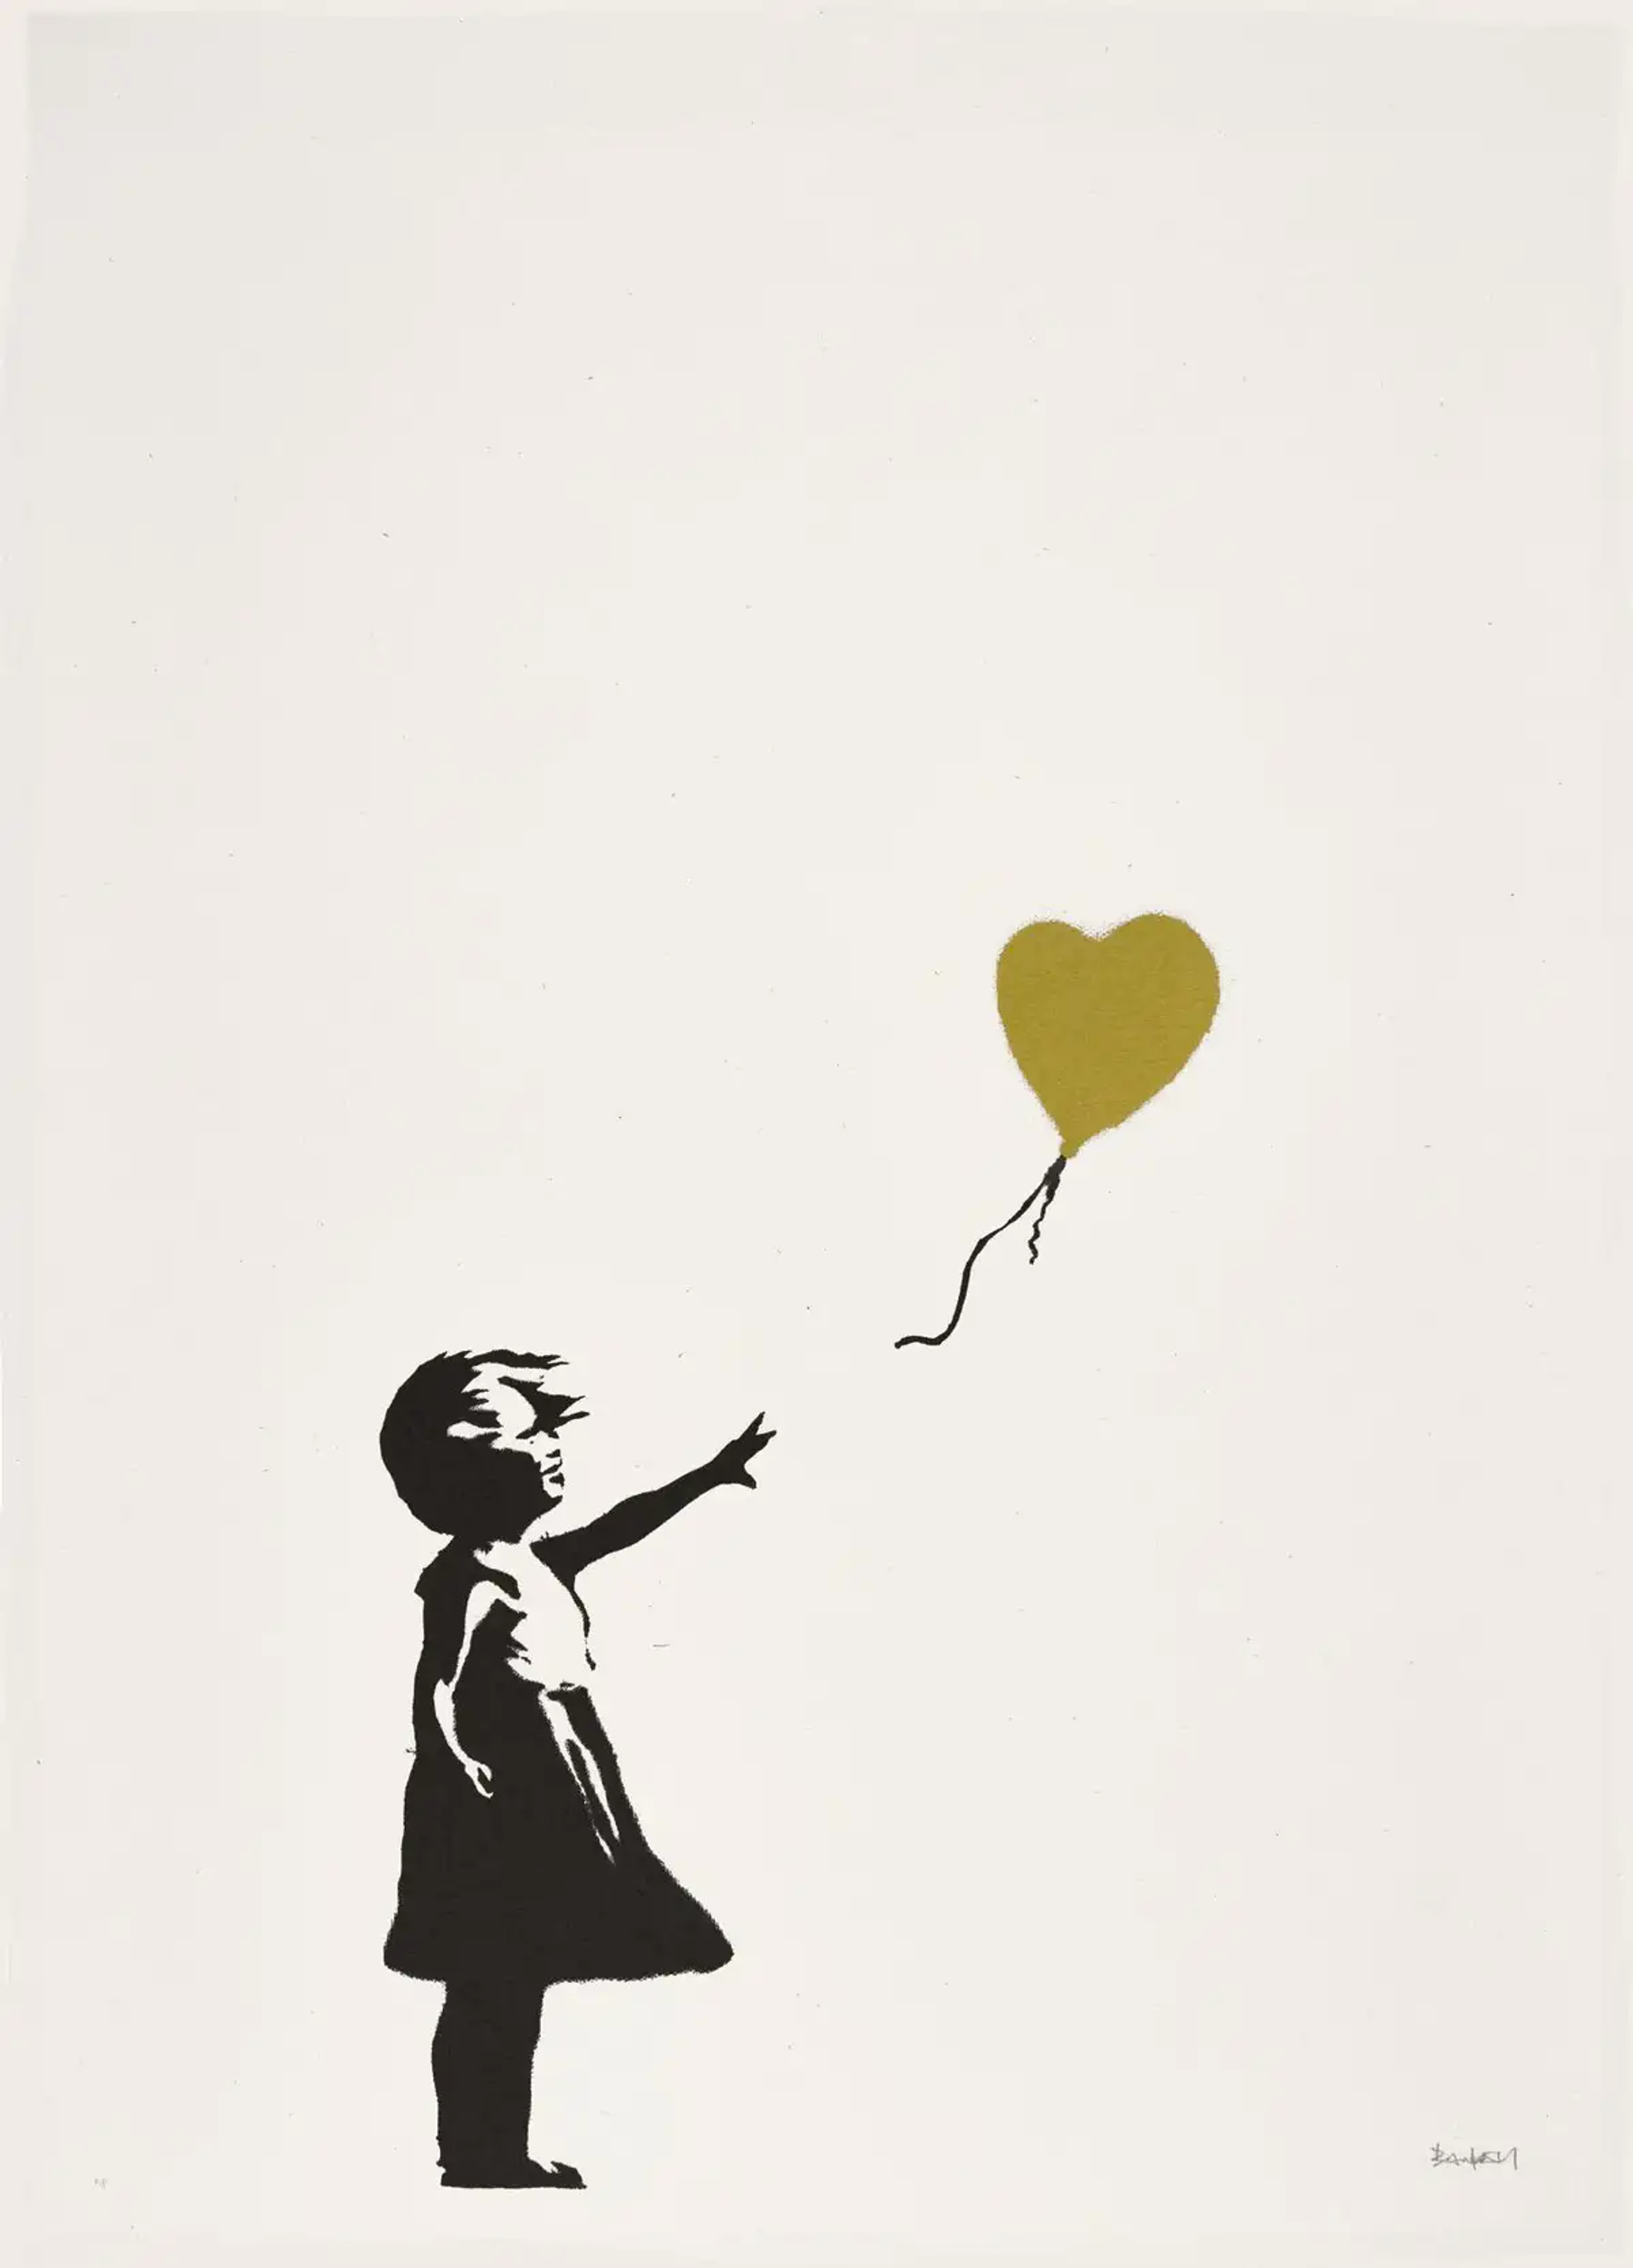 Banksy screenprint showing a black-and-white stencilled girl reaching for a gold heart balloon against a white background.